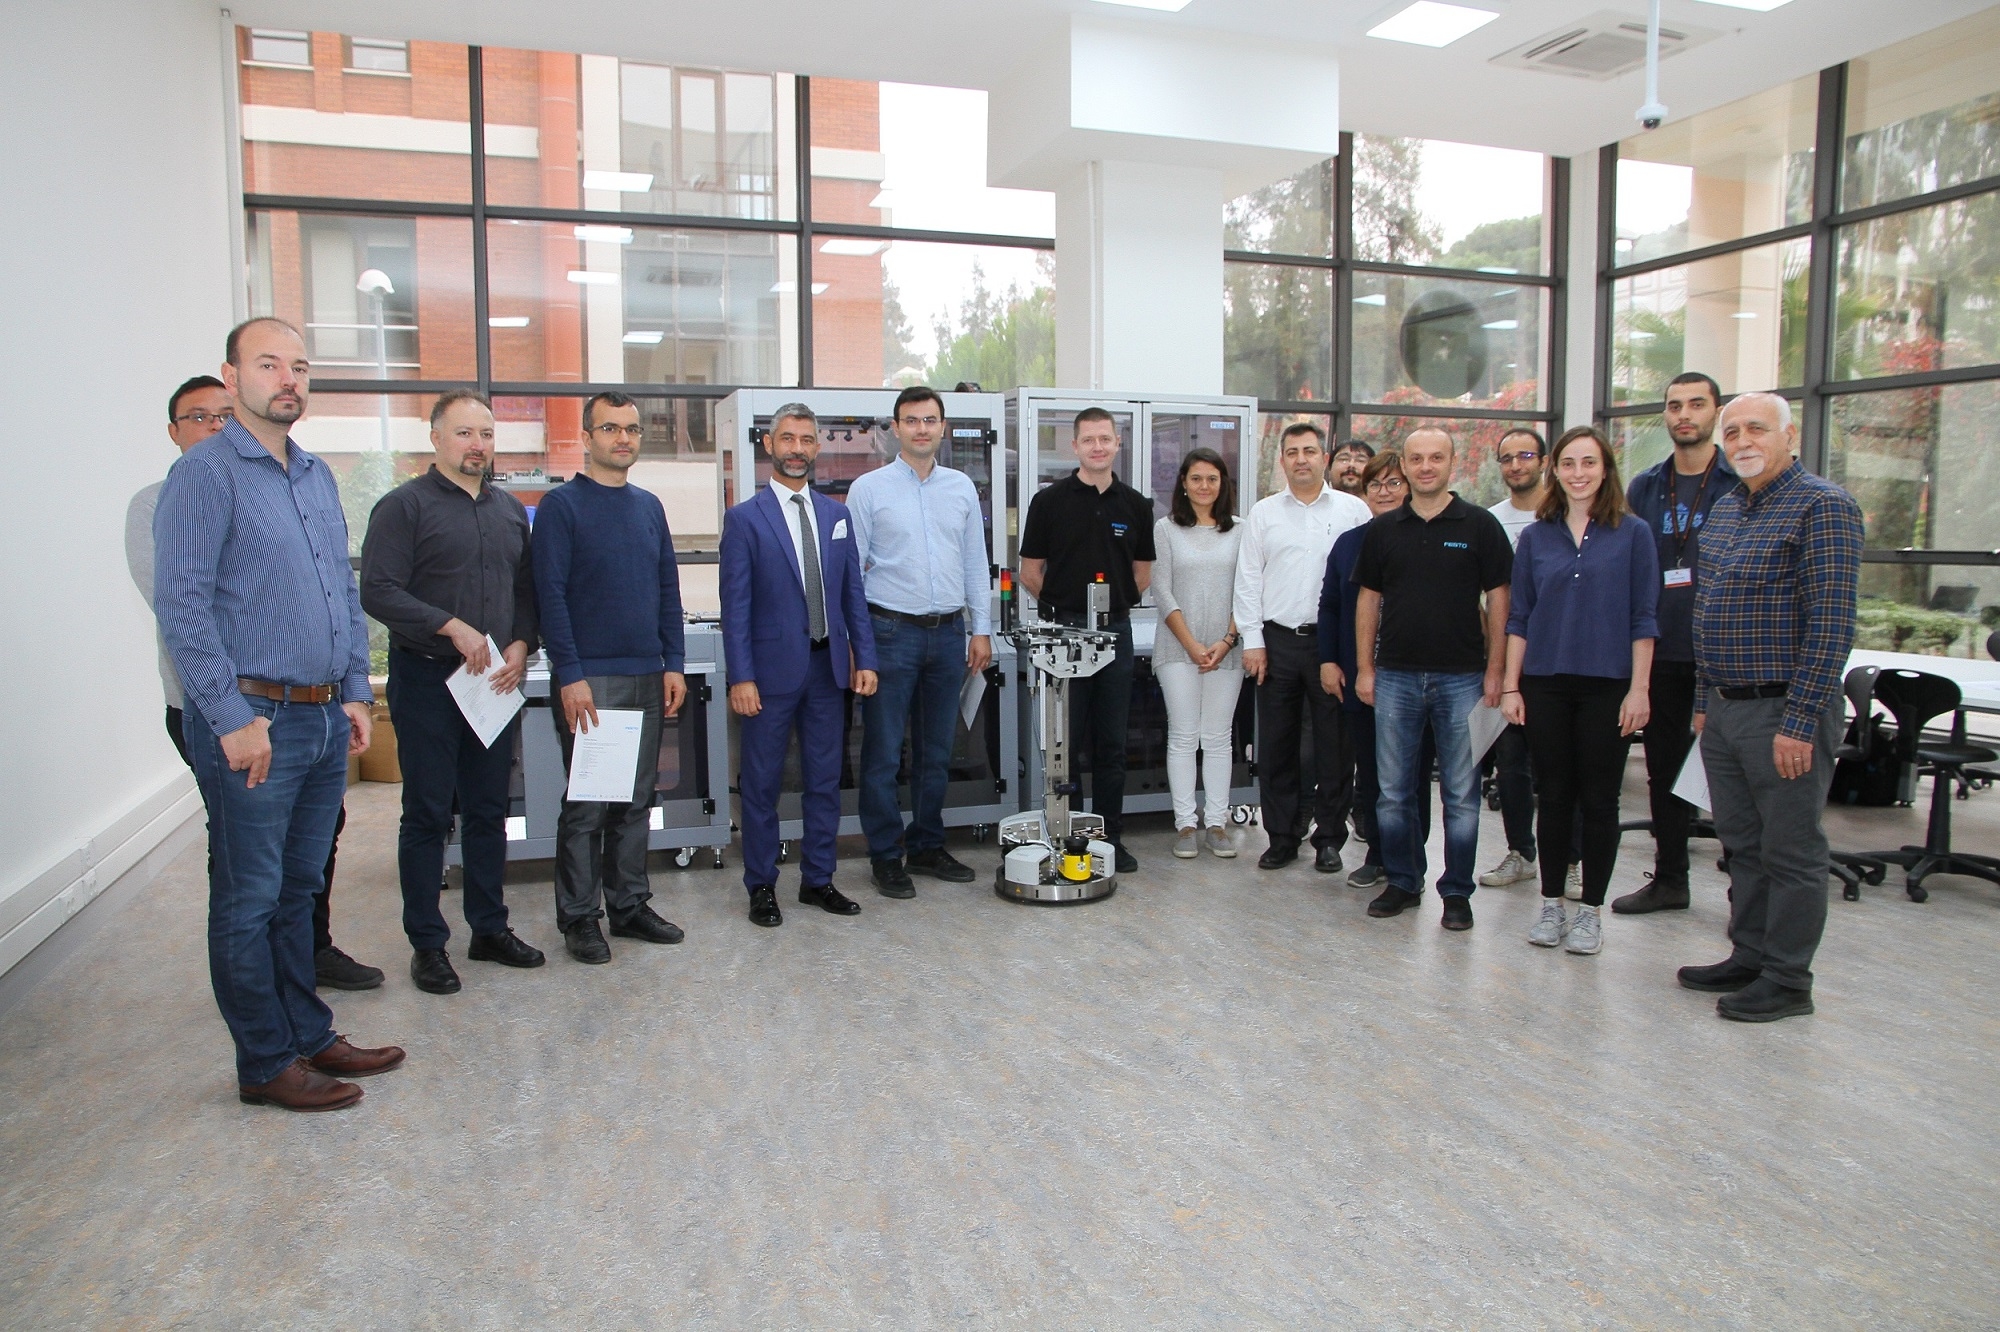 THE TRAINING FOR THE FIRST INDUSTRY 4.0 LABORATORY IN TURKEY IS COMPLETED